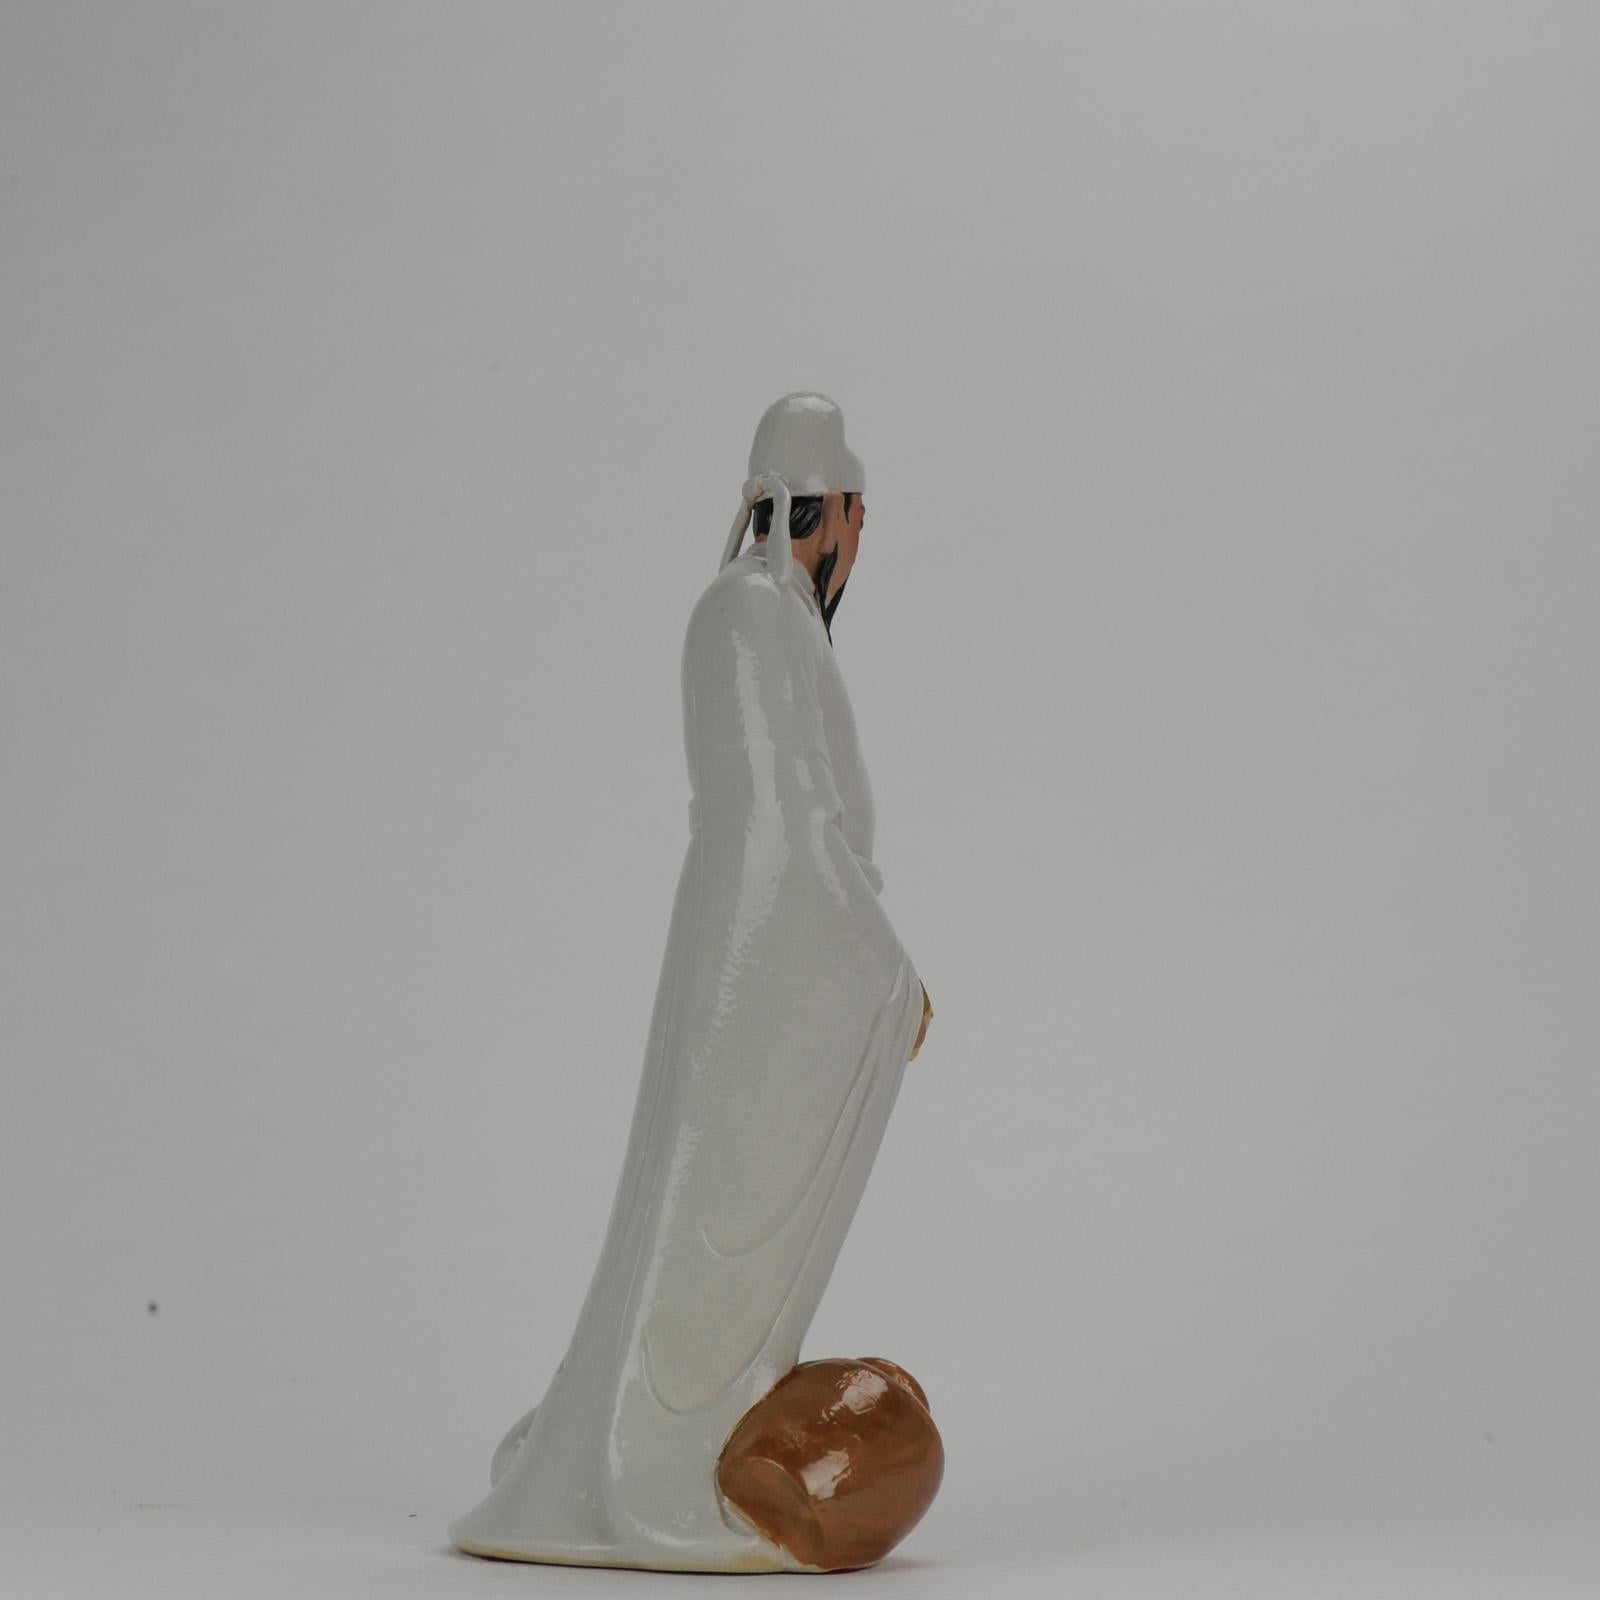 Chinese Porcelain Sculpture Man Holding Ritual Vessel, Dated 1998, Wang Qiang For Sale 3